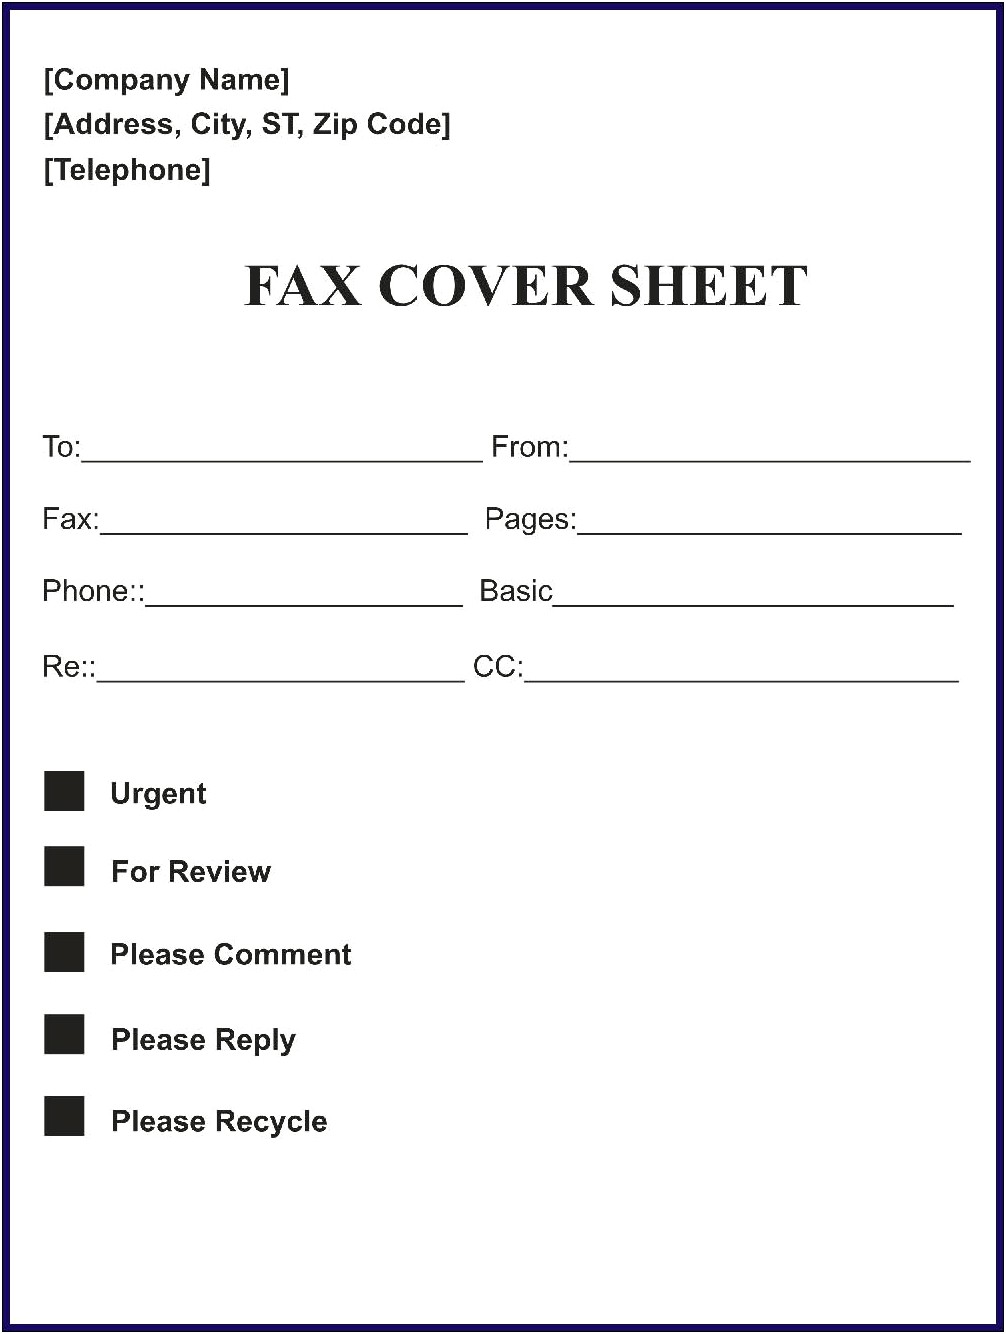 Free Basic Fax Cover Sheet Template